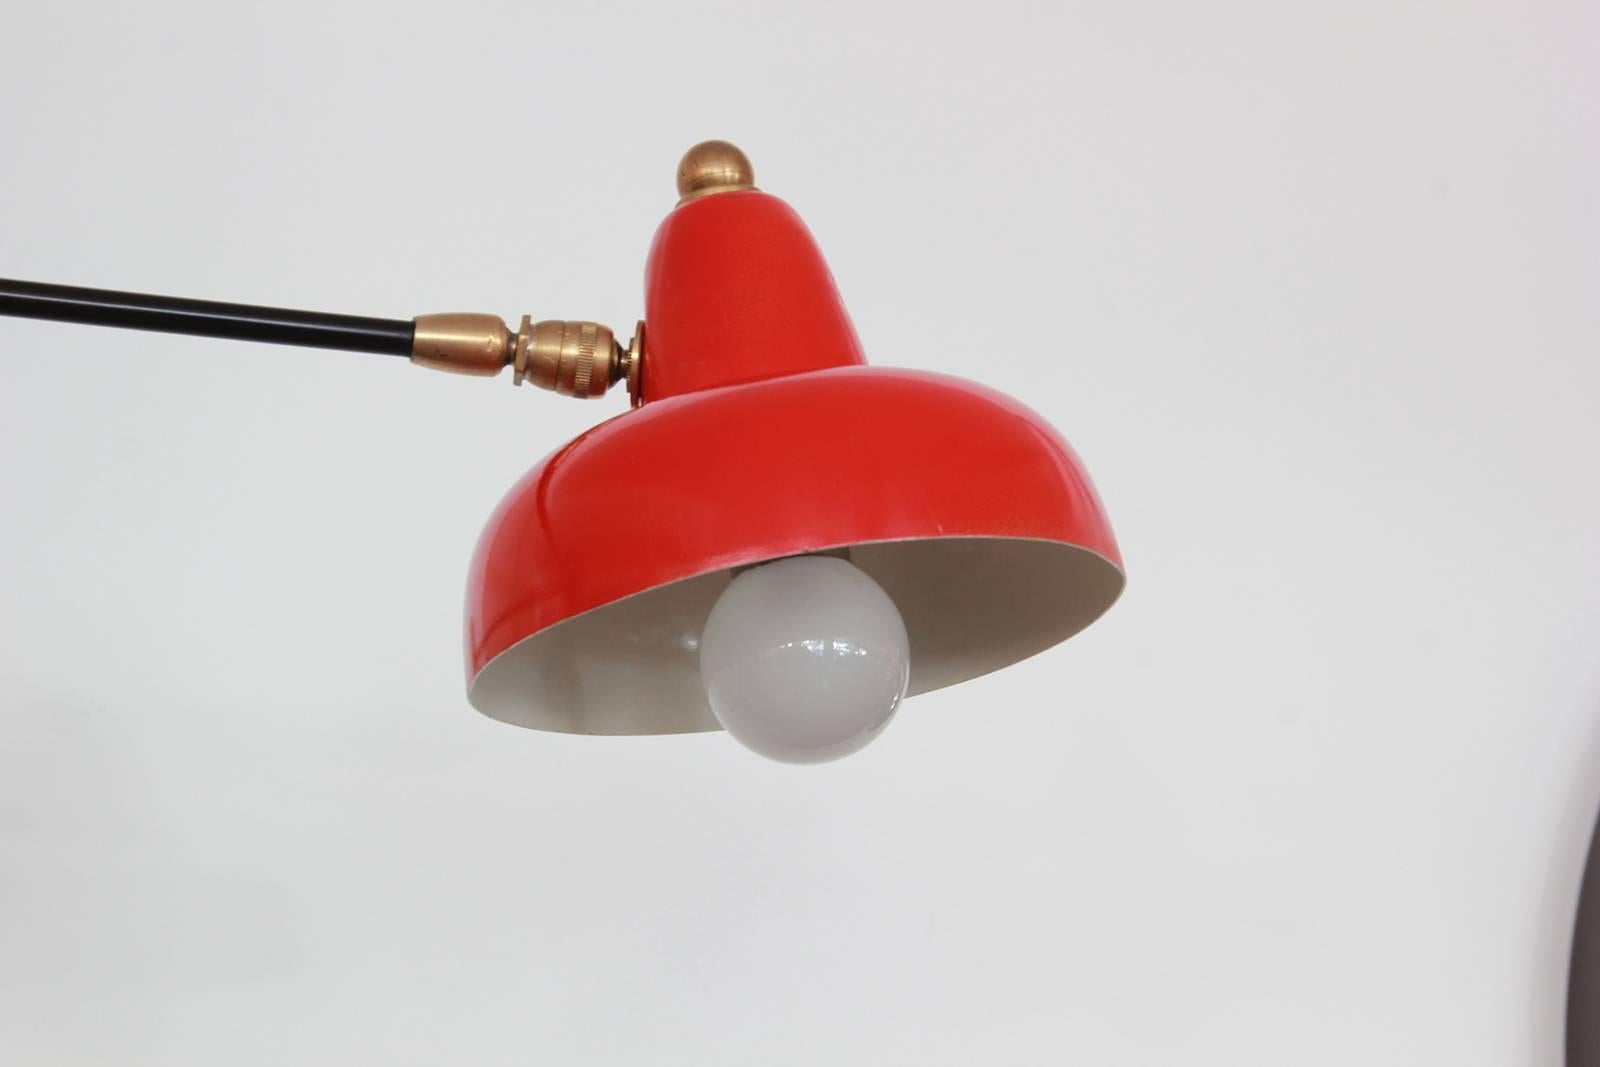 Italian counterbalance articulating wall sconce with original red metal shade, brass arm and hardware. Newly rewired.
Great scale.
Newly rewired.